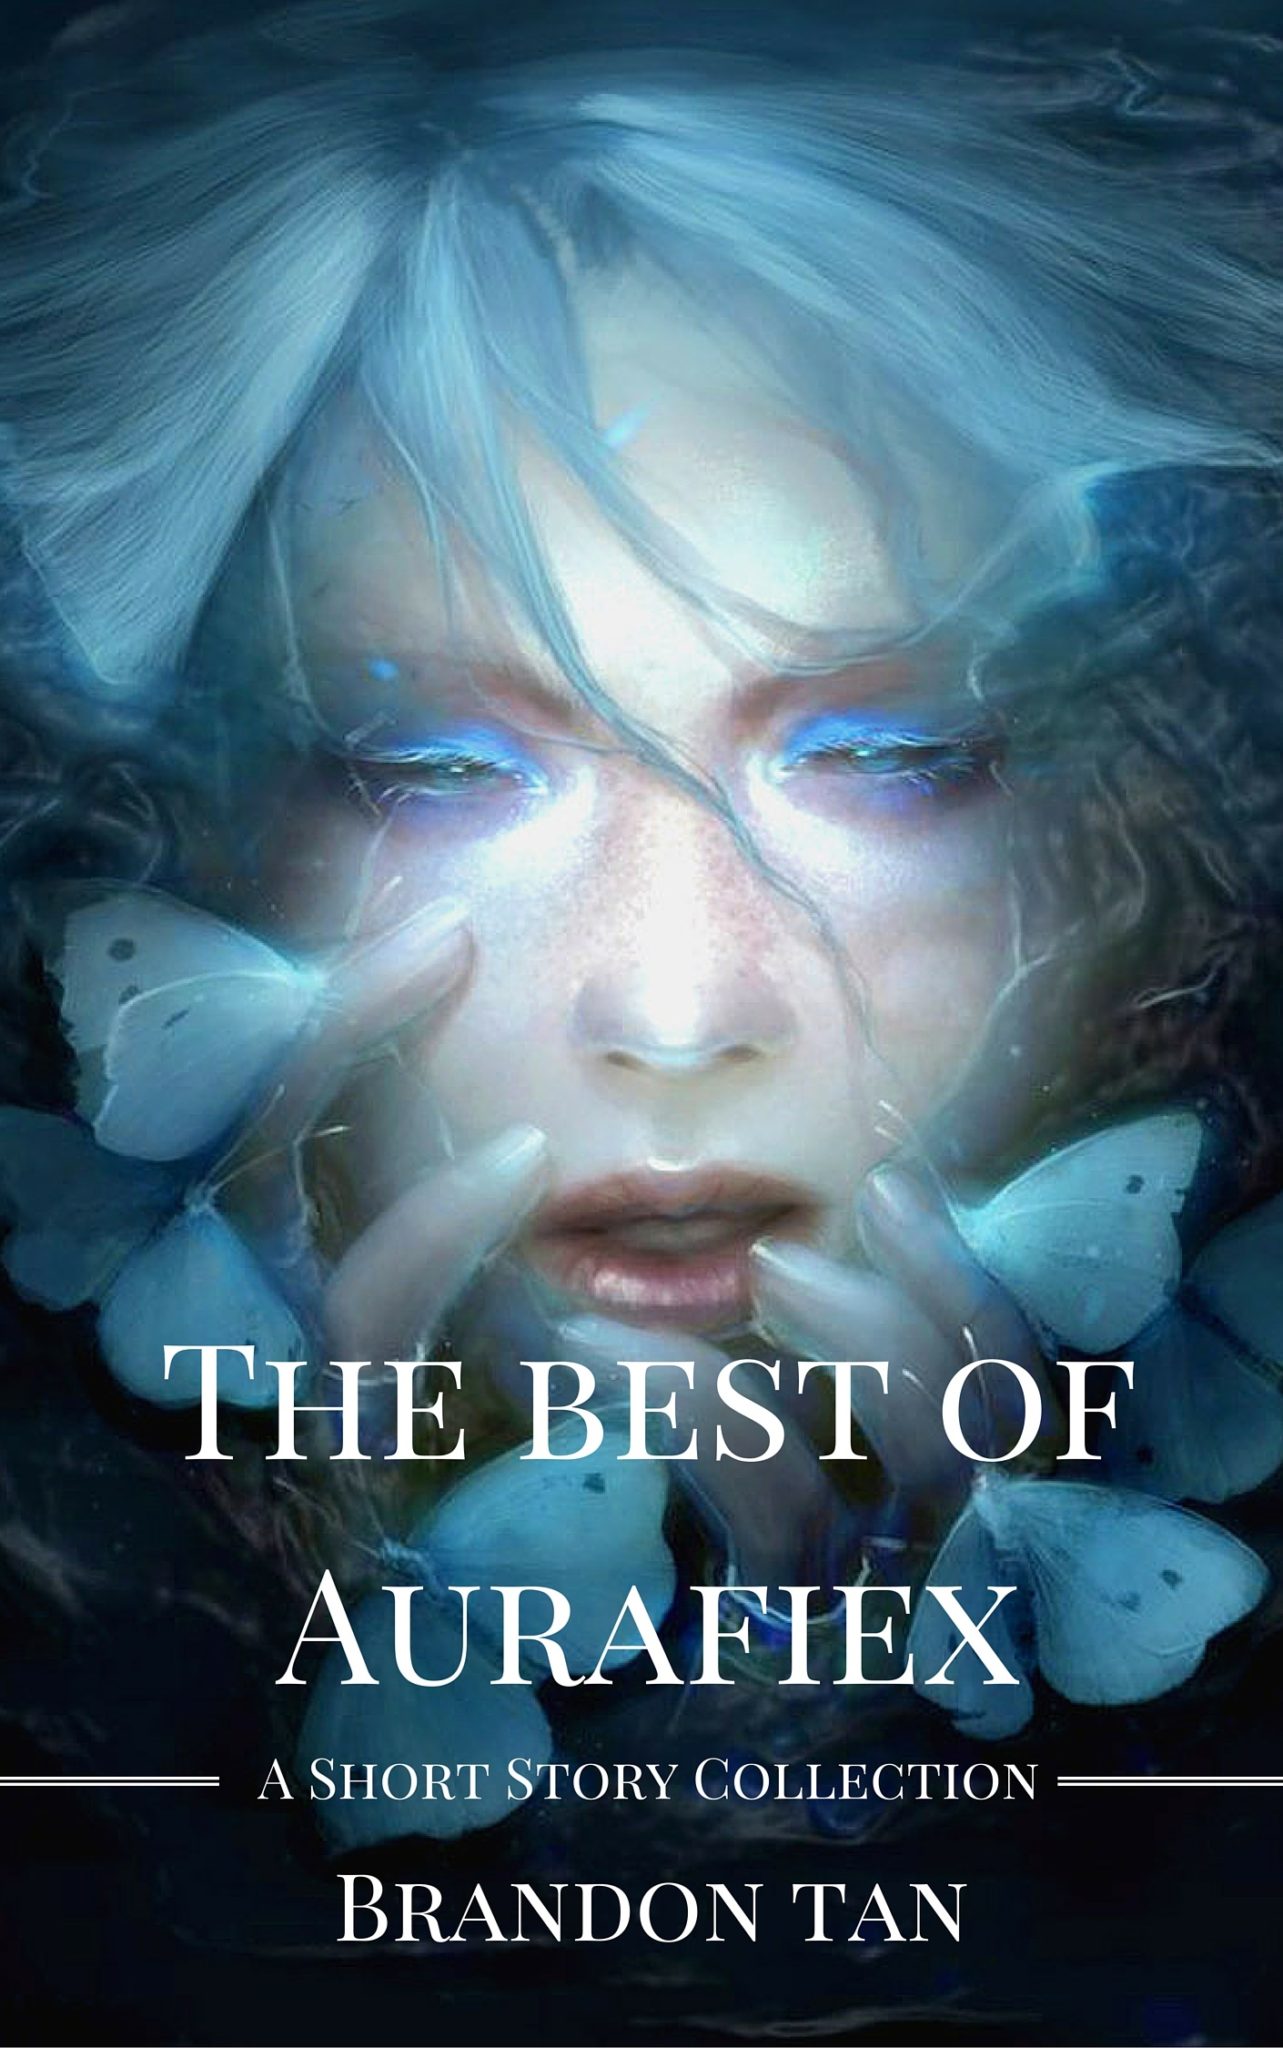 FREE: The Best of Aurafiex – A Short Story Collection by Brandon Tan